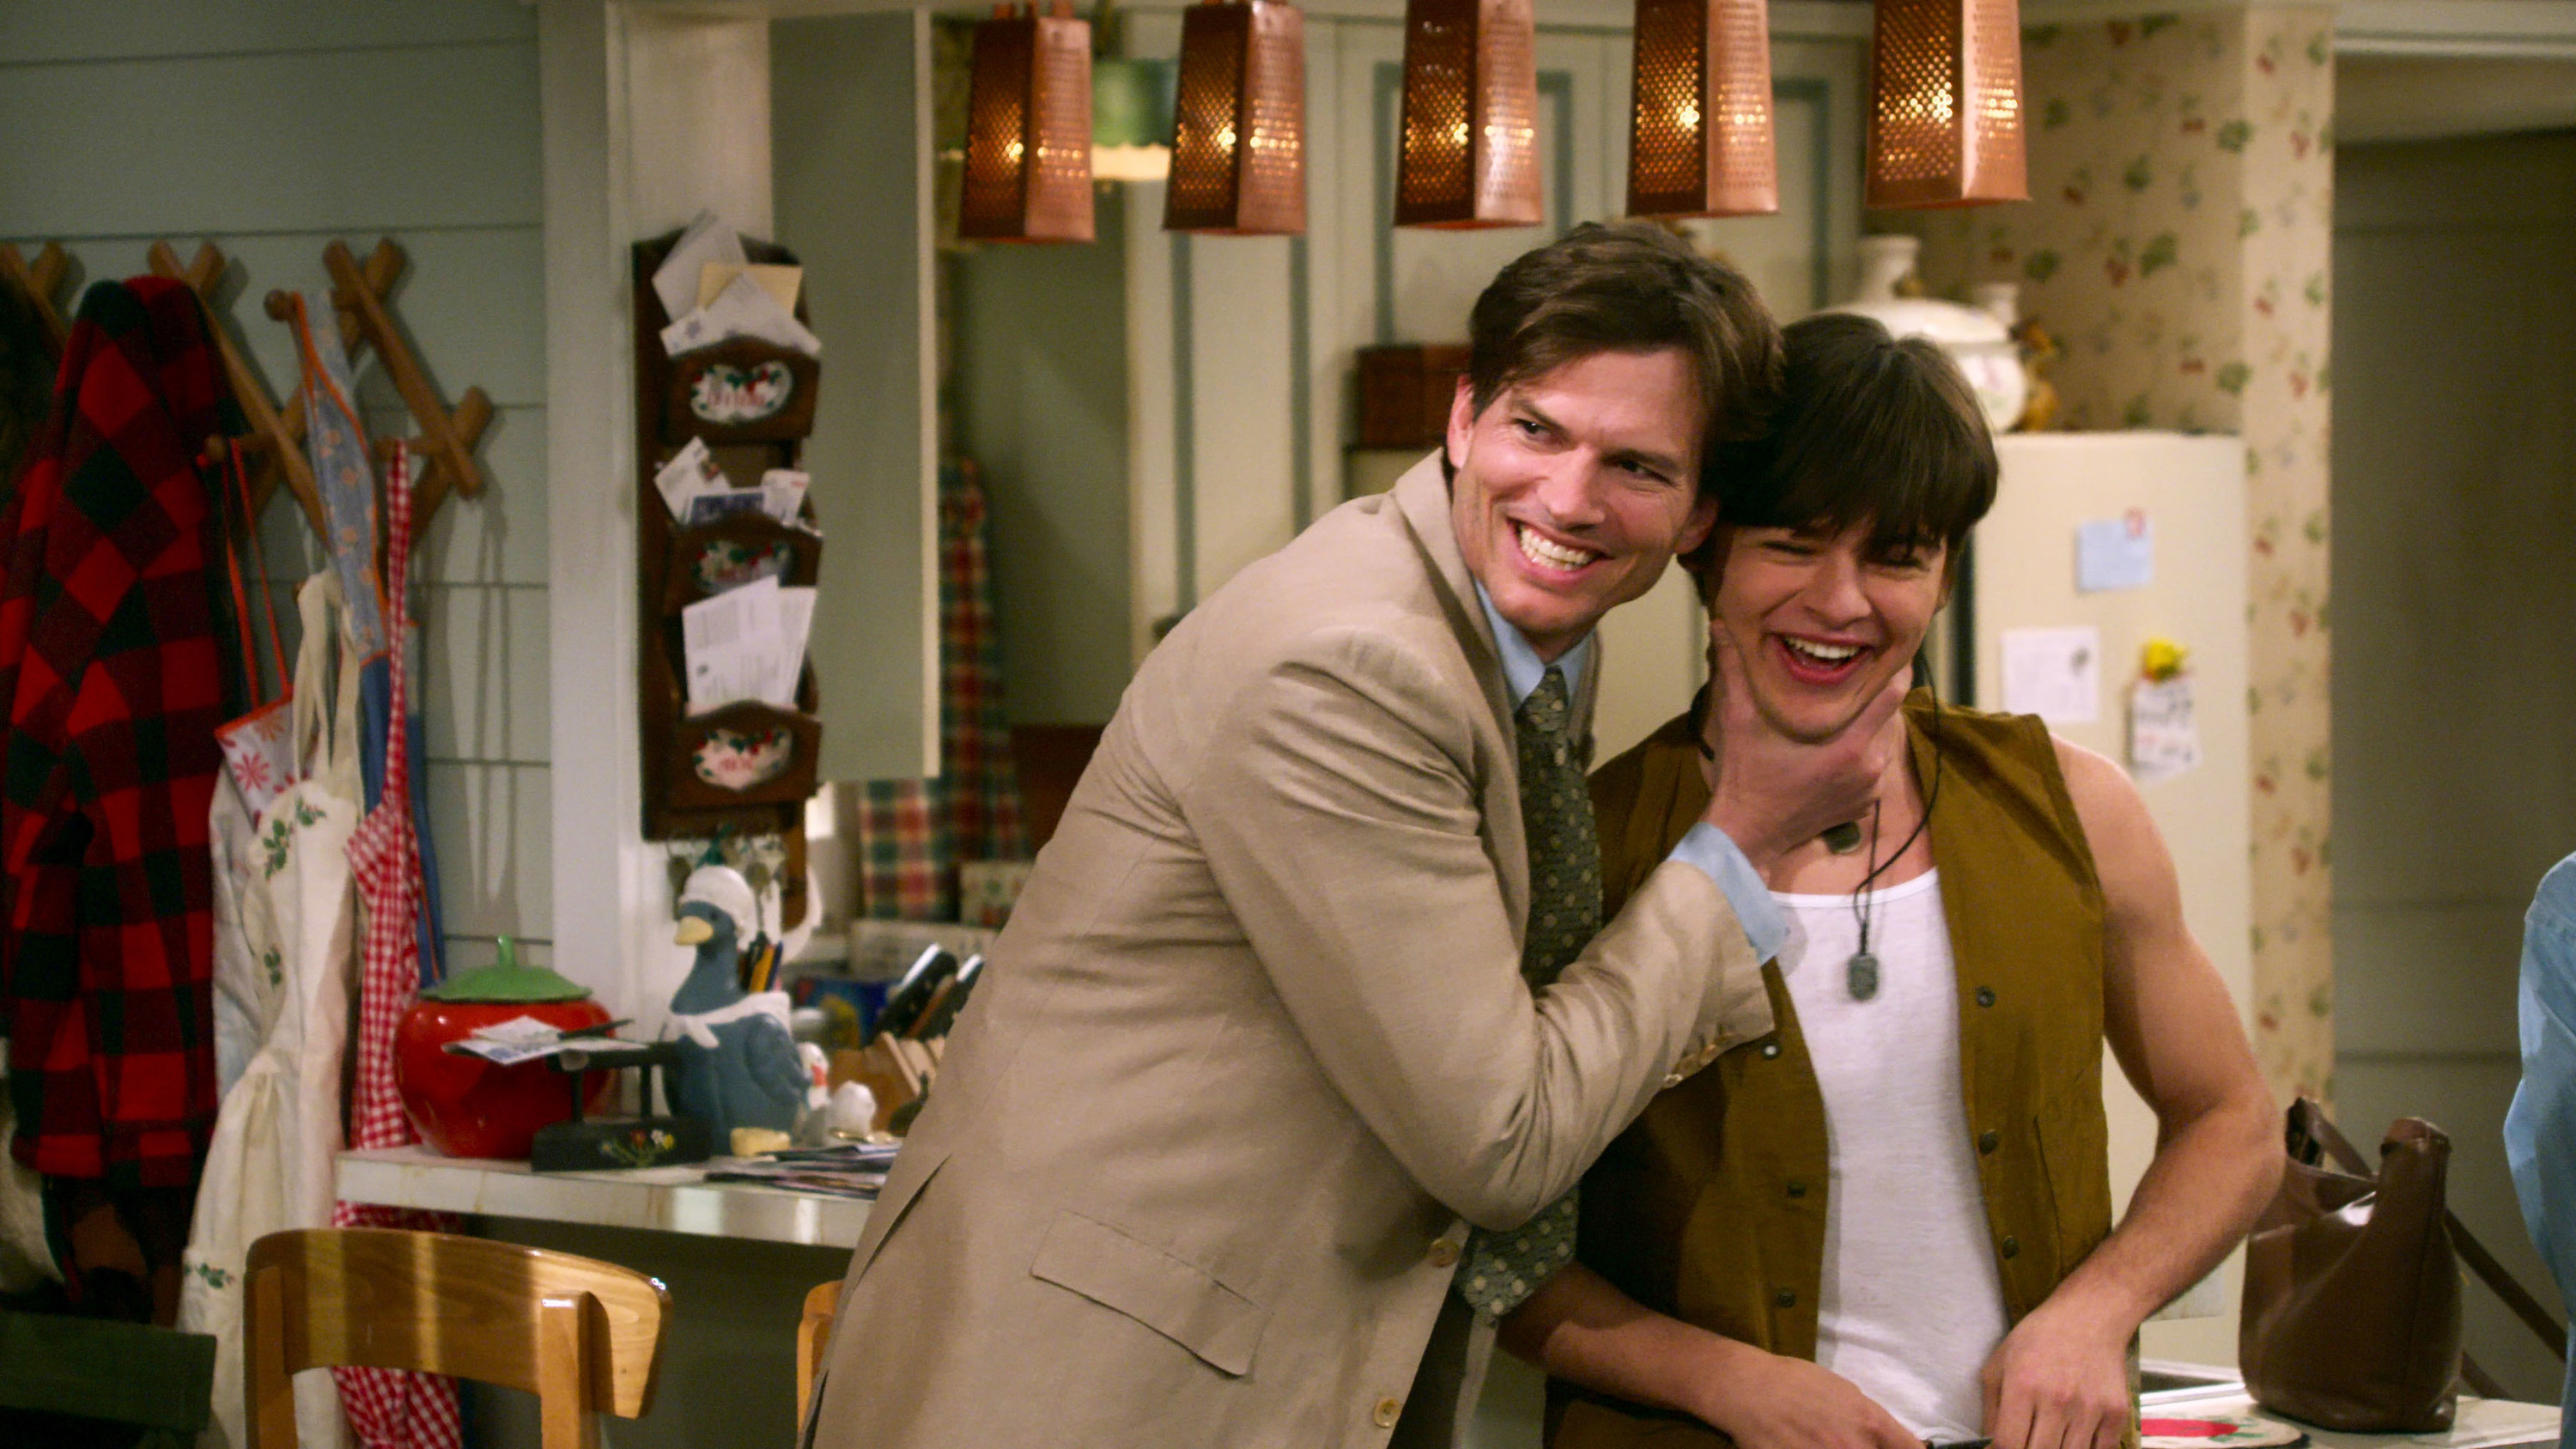 Kelso and Jay laughing